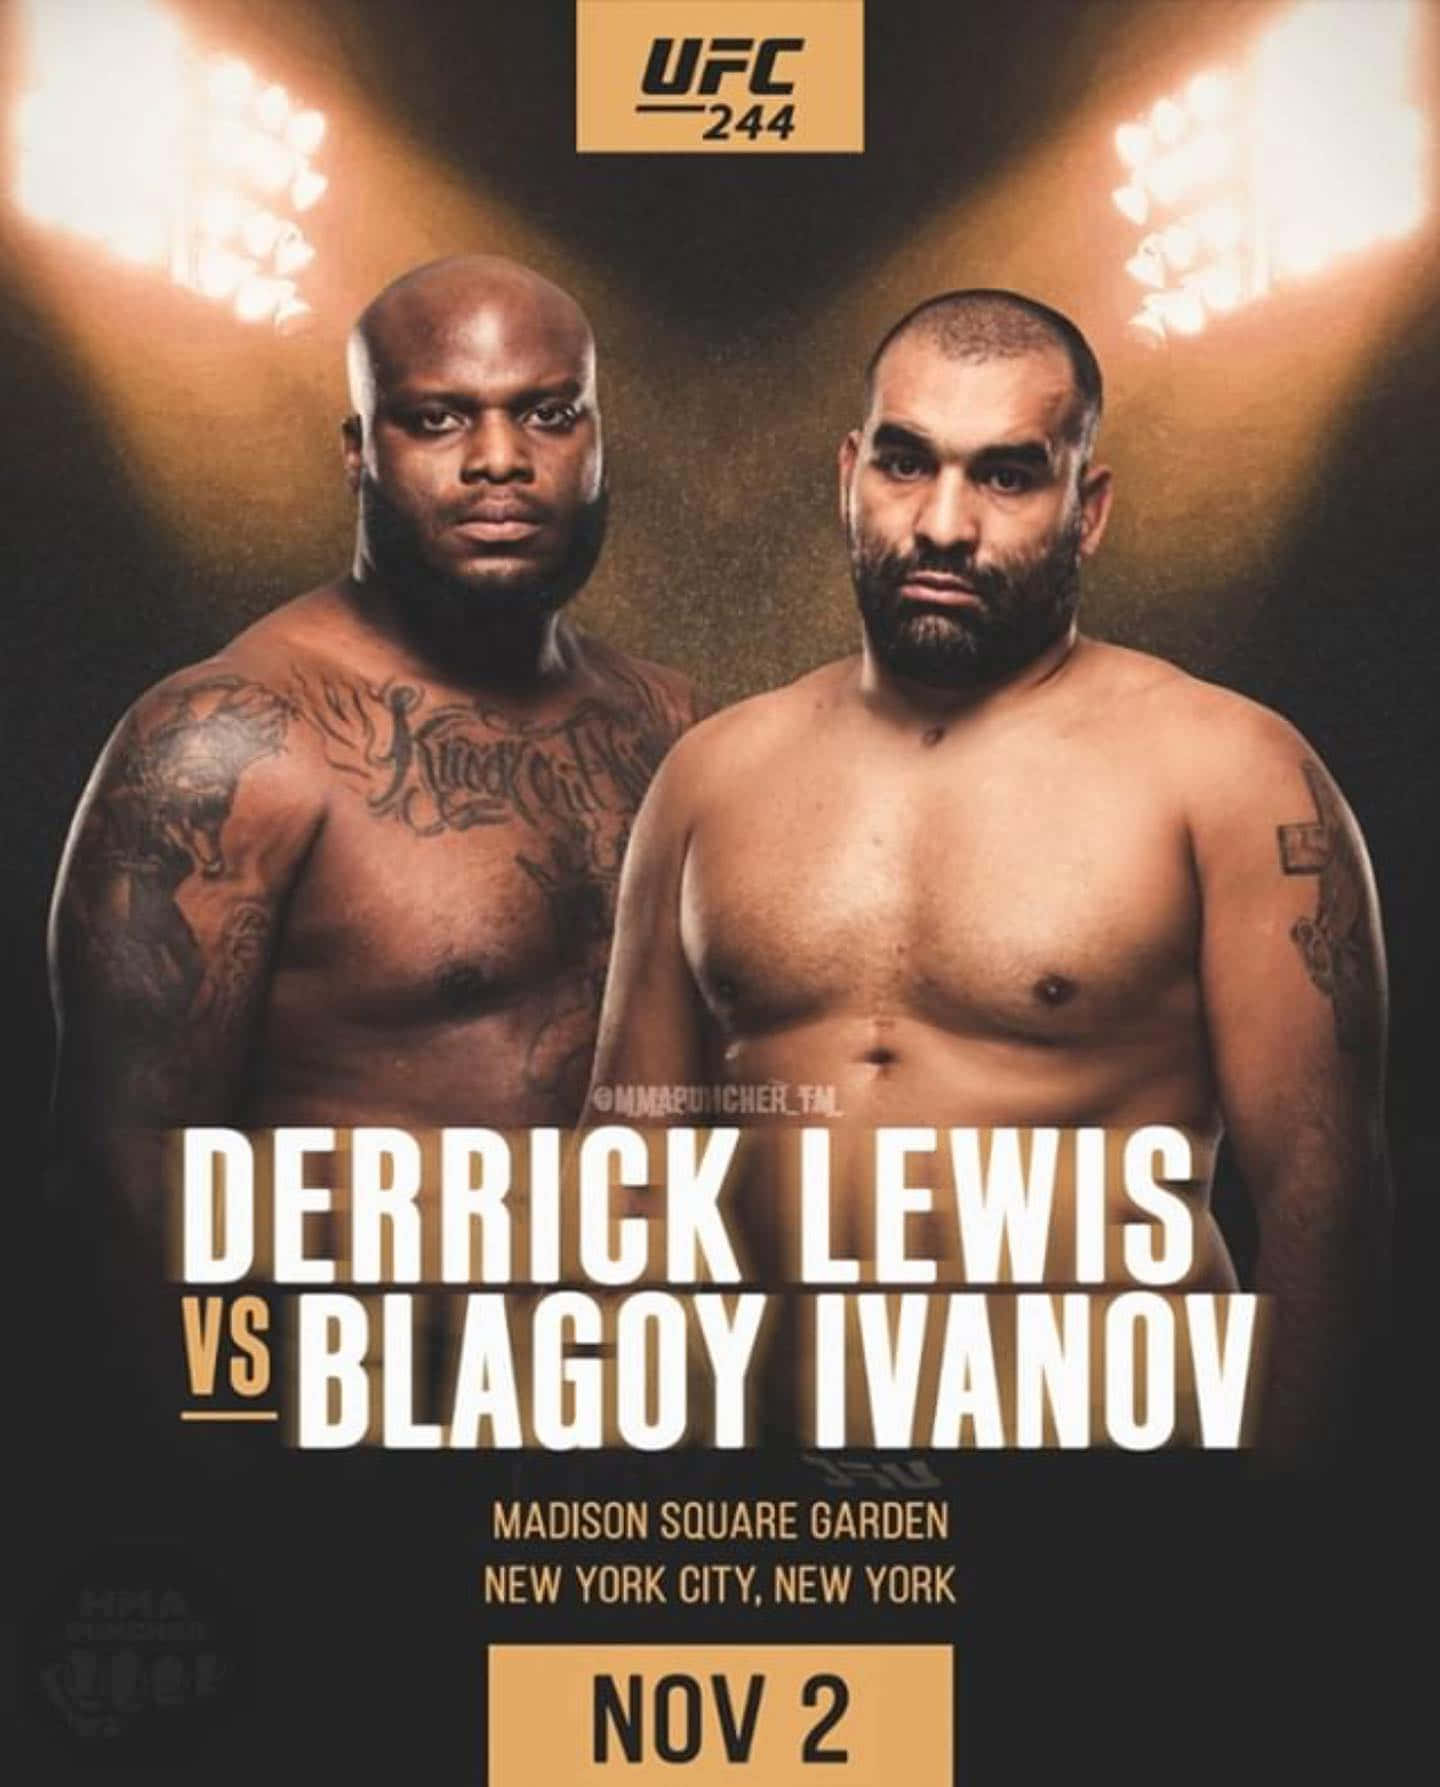 Blagoy Ivanov And Derrick Lewis Fight Poster Wallpaper